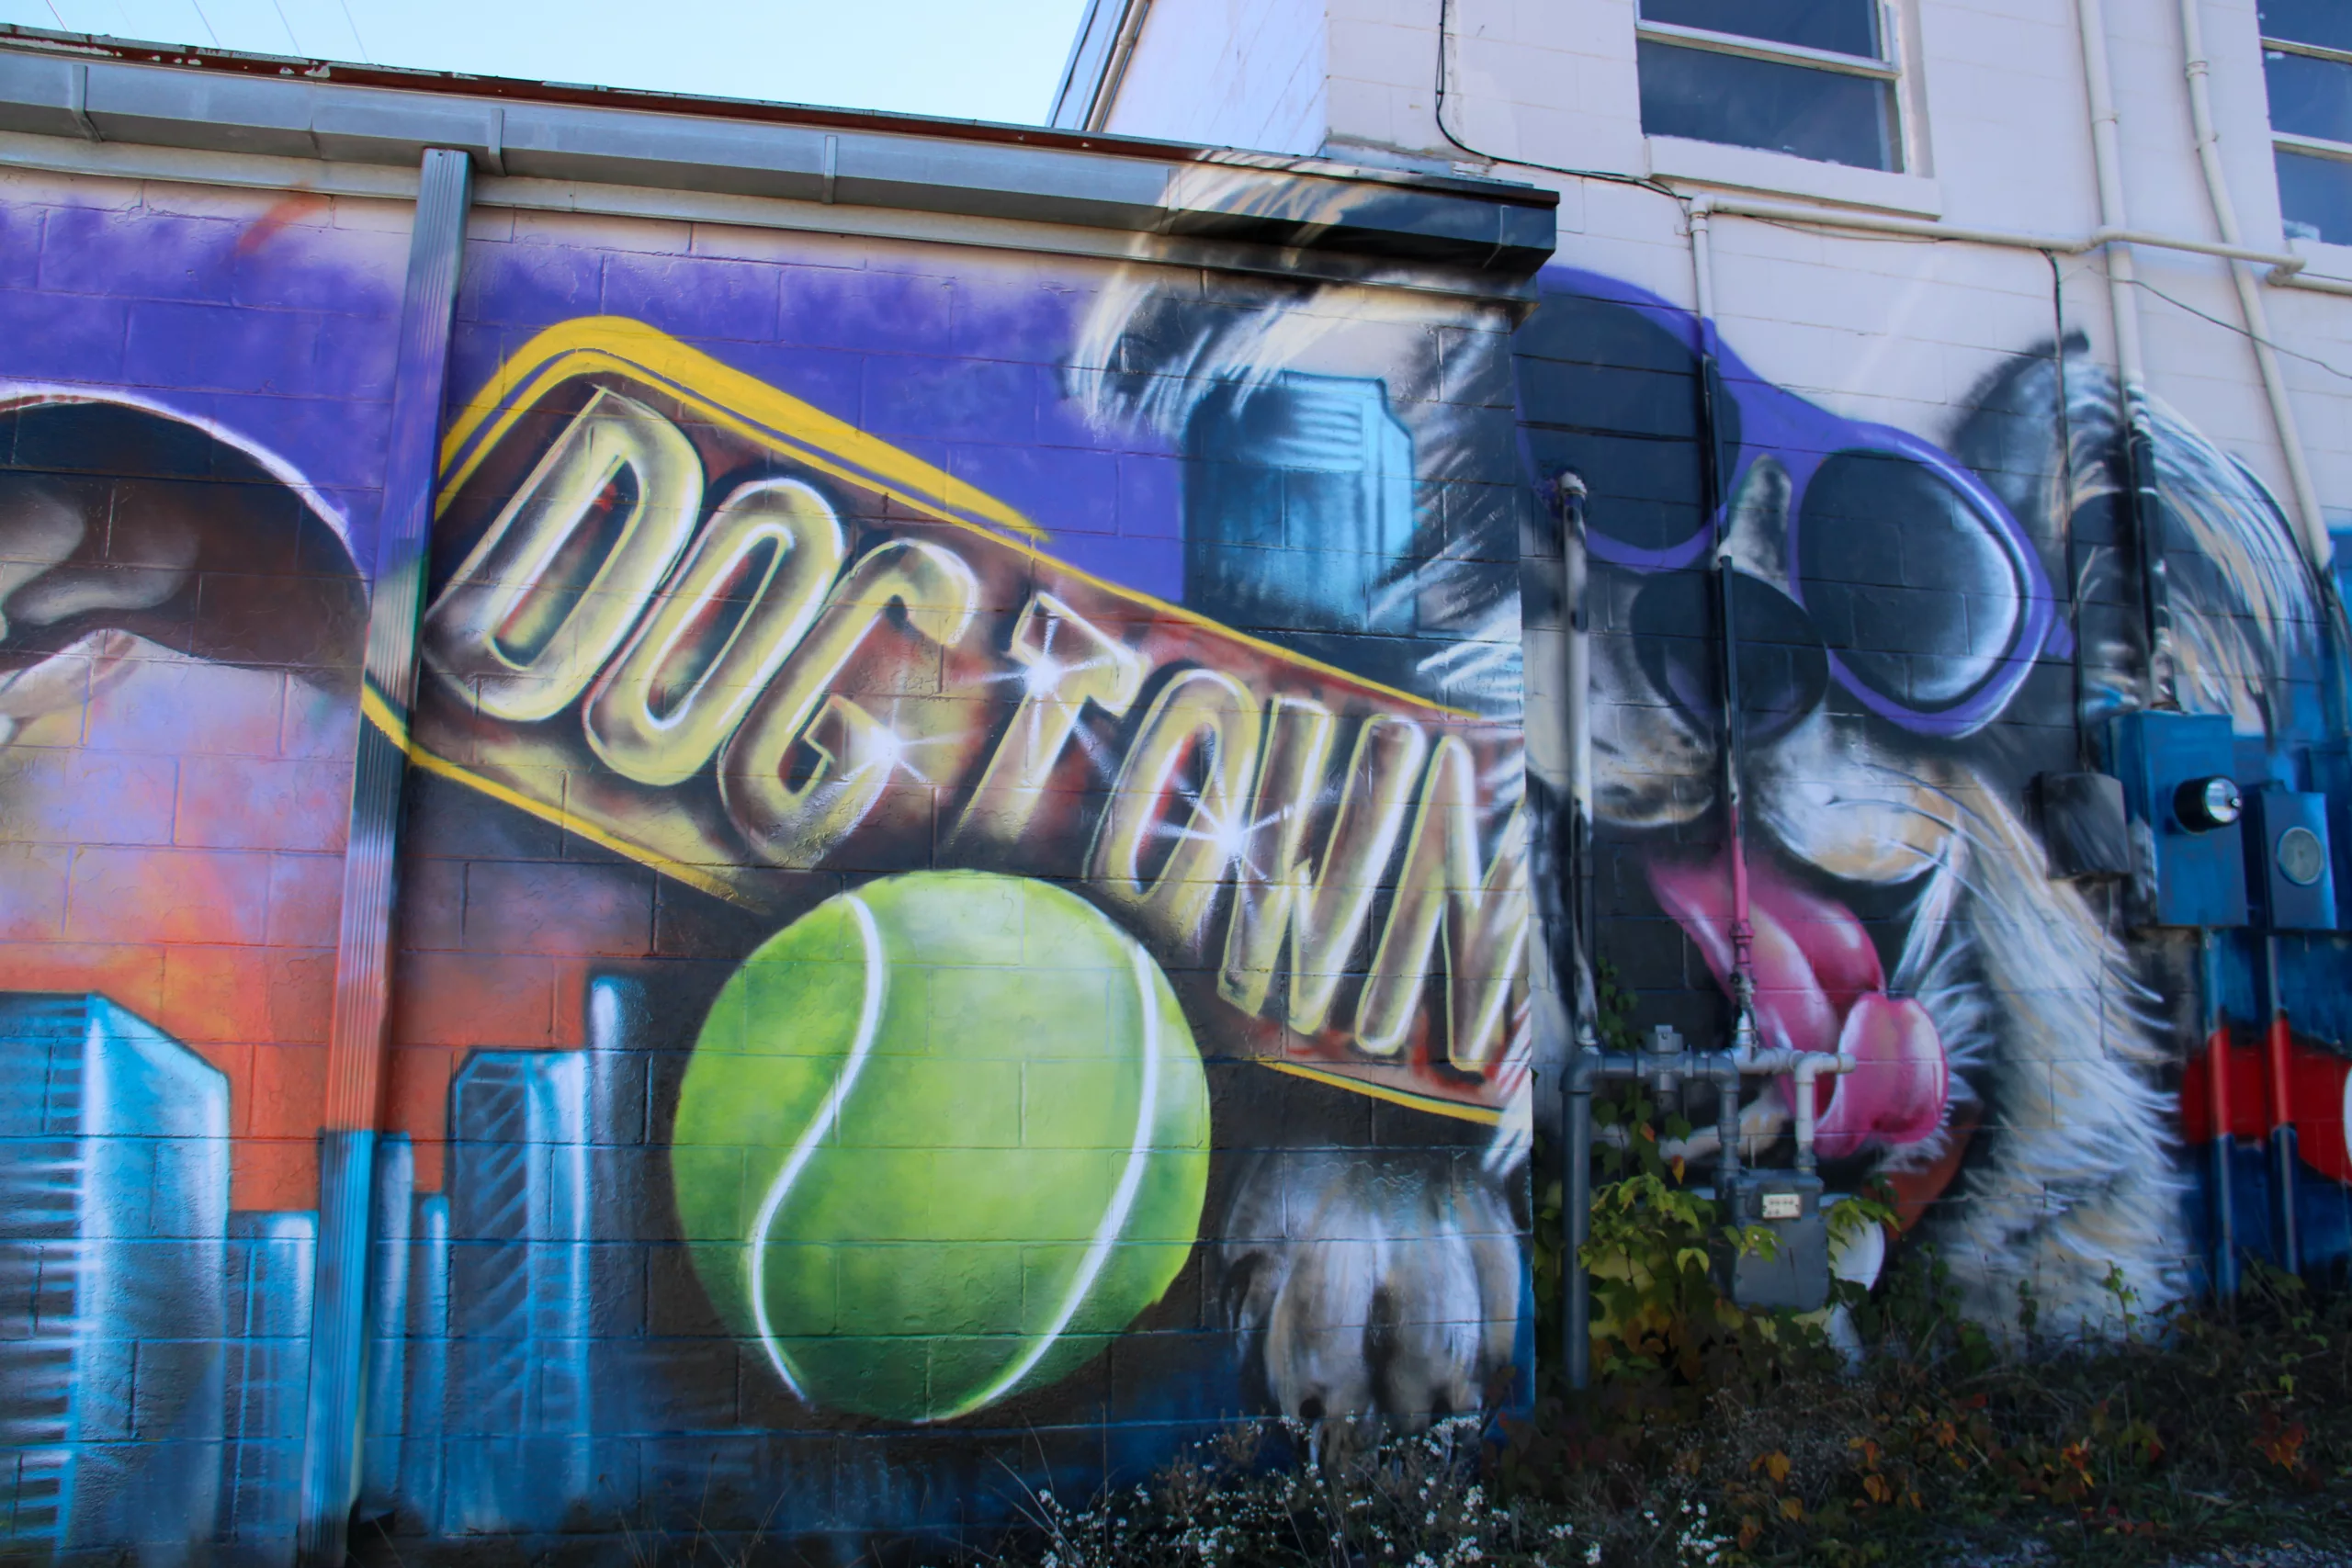 When Past and Present Collide: The Story Behind DogTown Lexington's Abrupt Closure